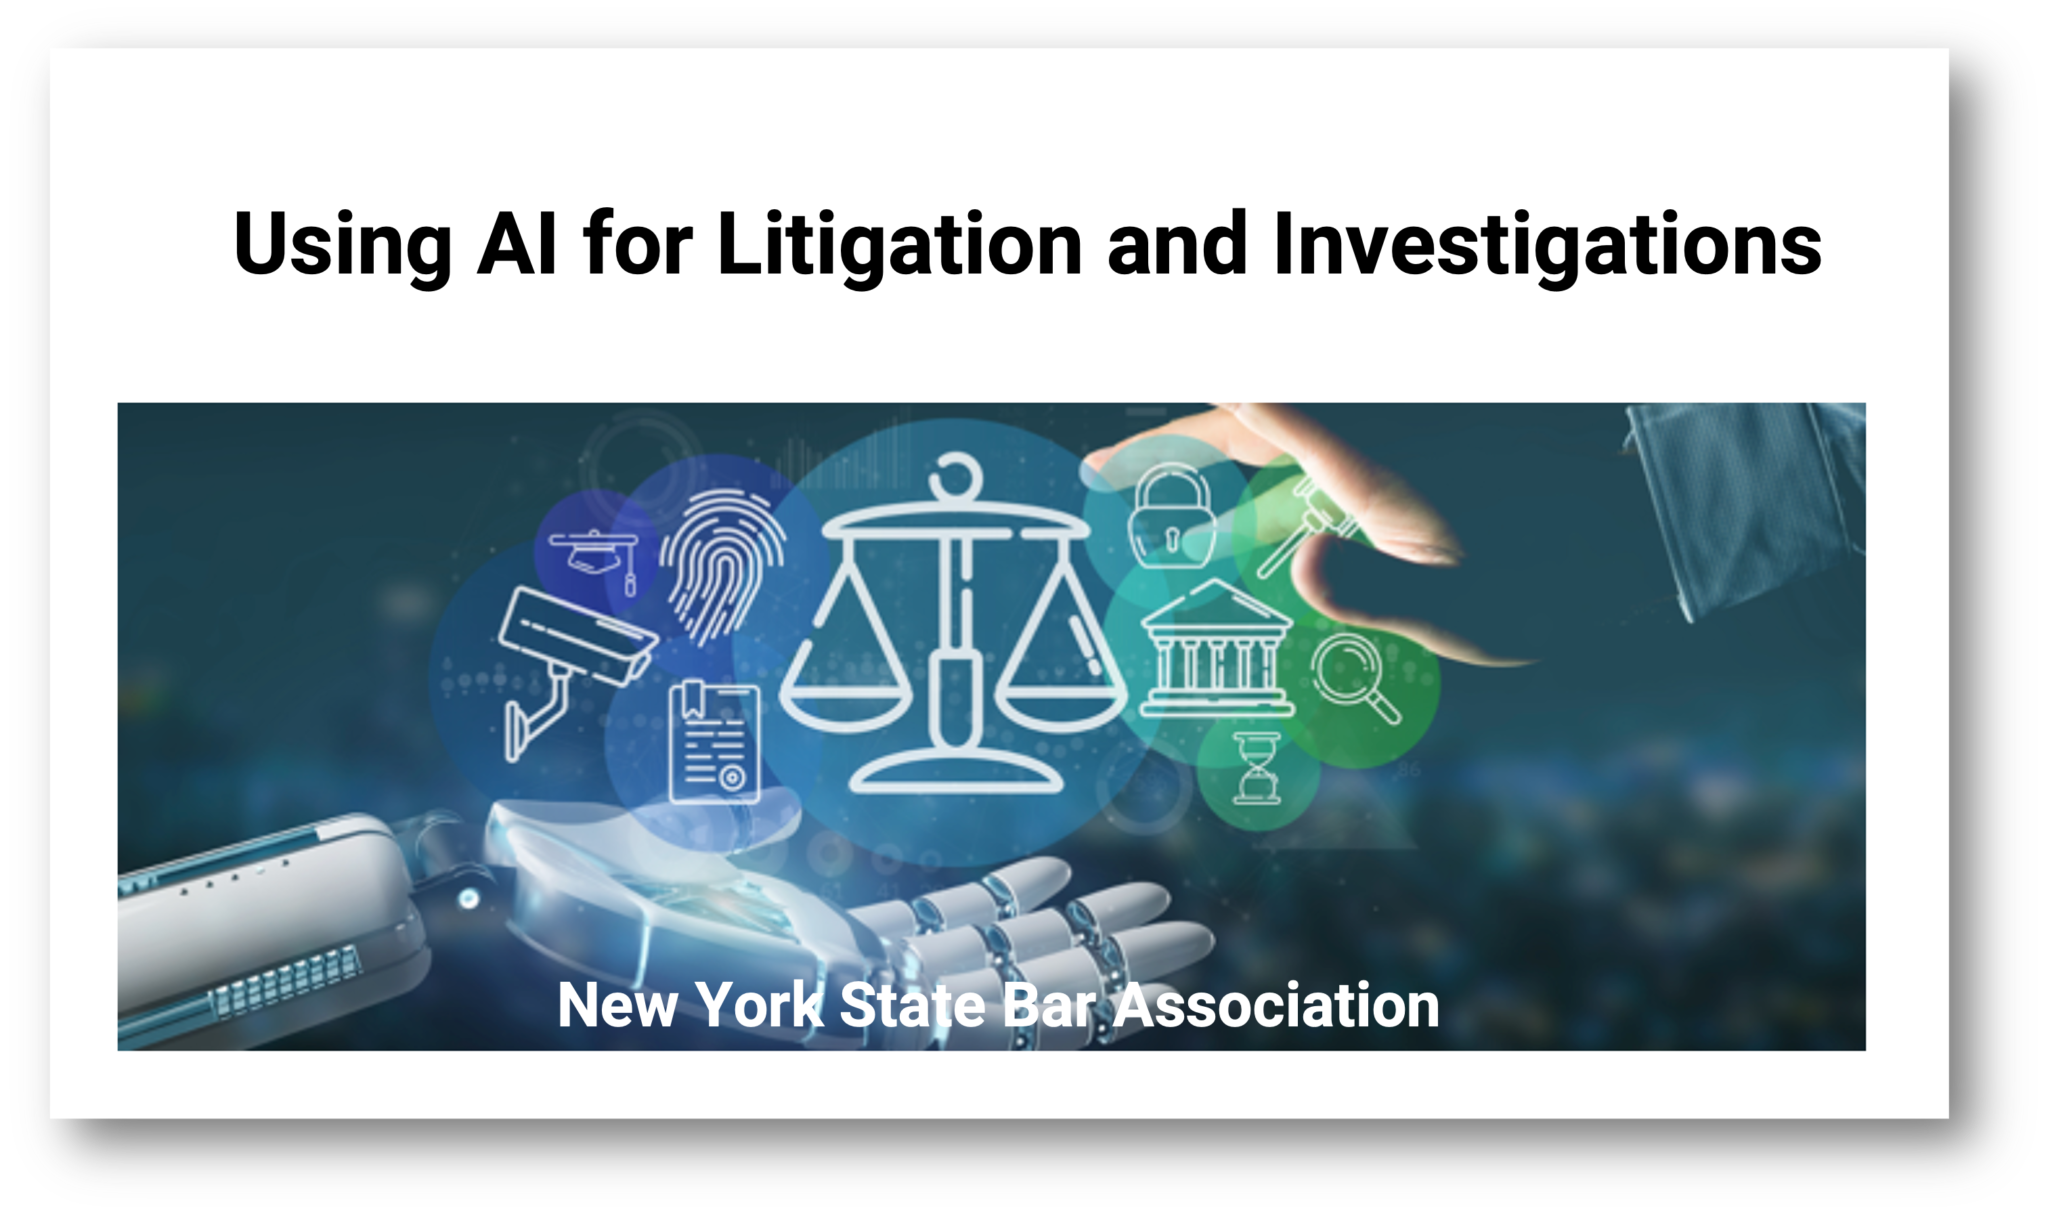 Tredennick presents at the NYSBA CLE on Using AI for Litigation and